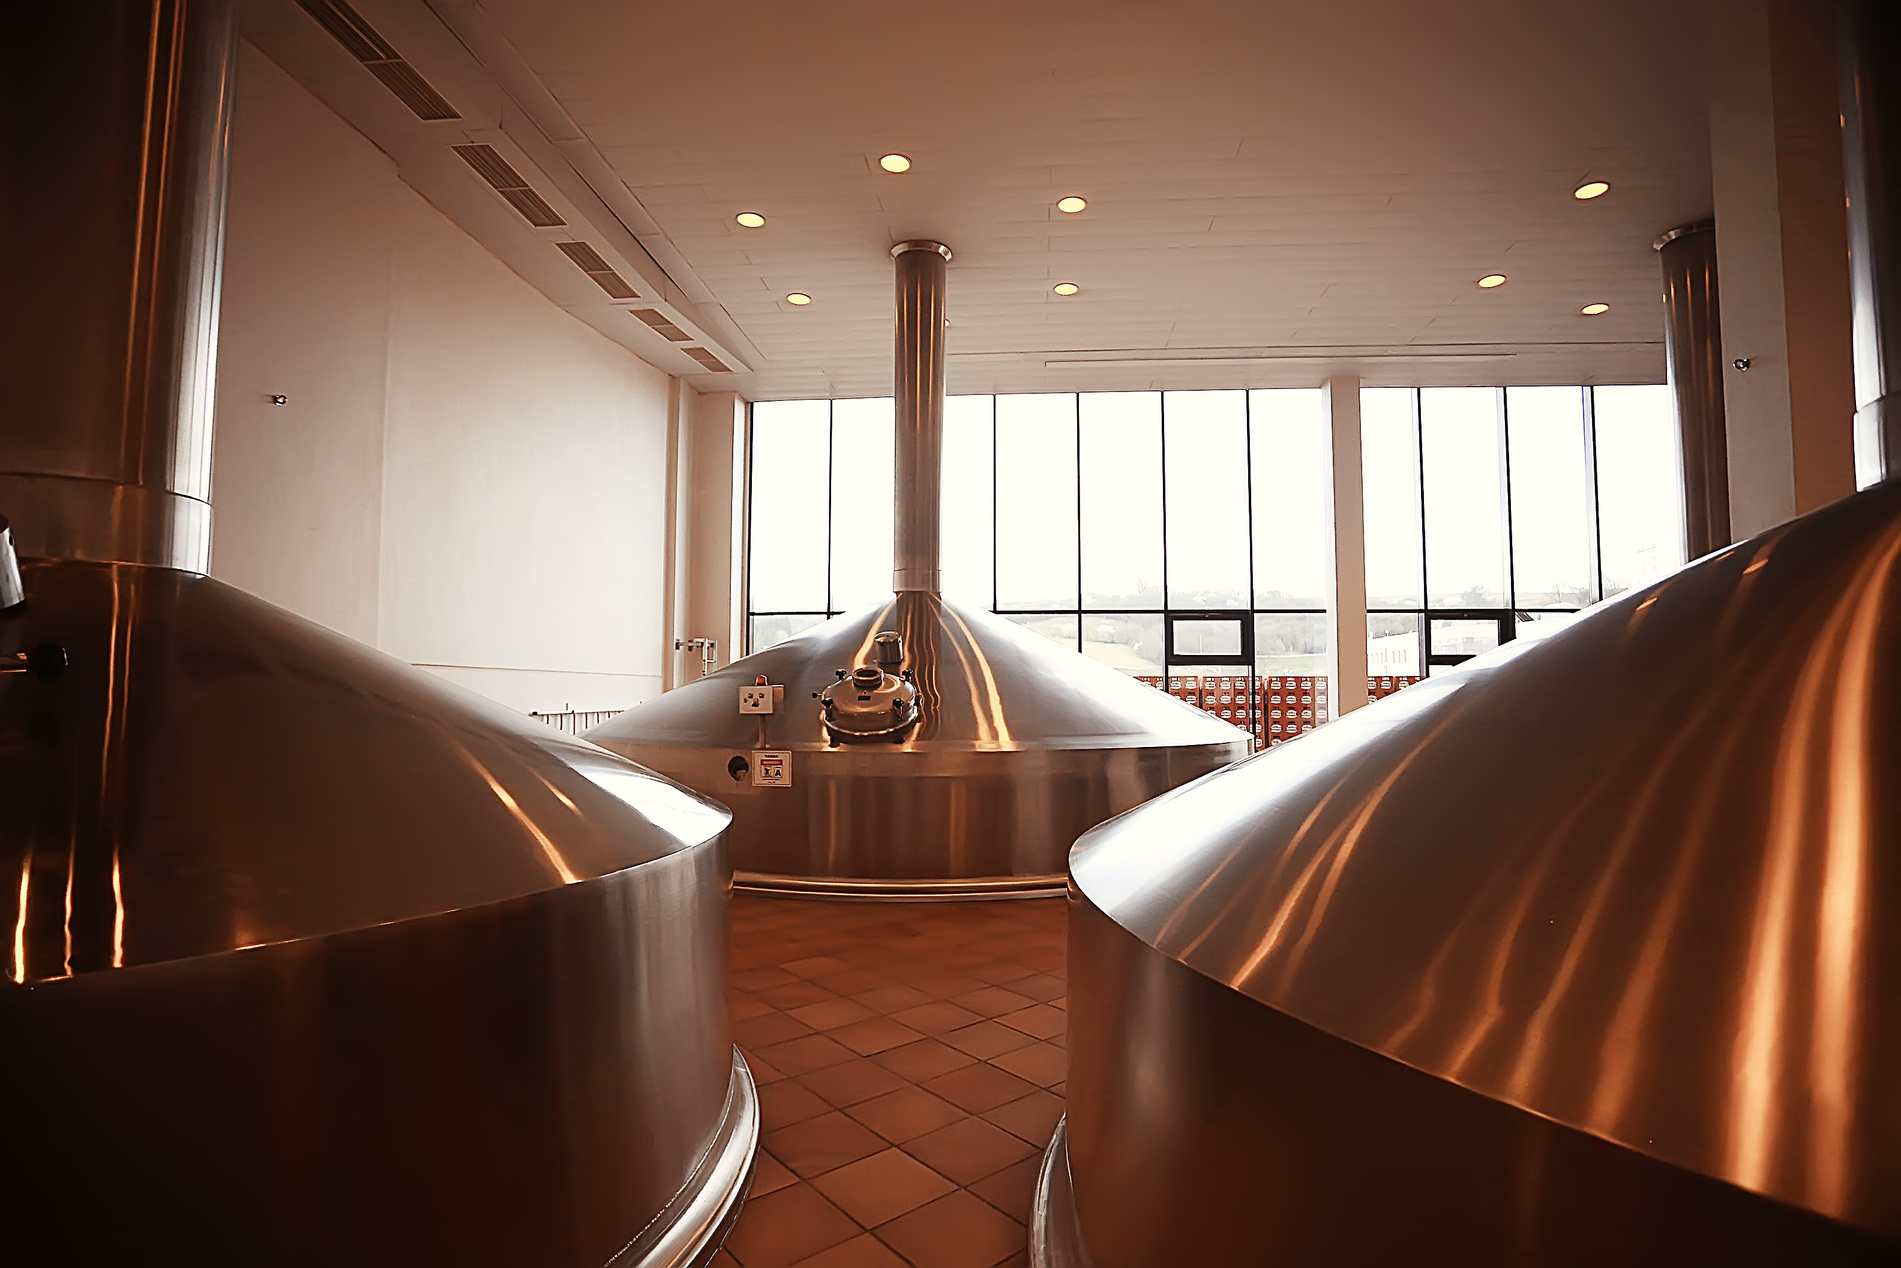 Brewery Stainless Steel Tanks / Business Concept Brewed Beer, Craft Beer, Brewery, Beer Production